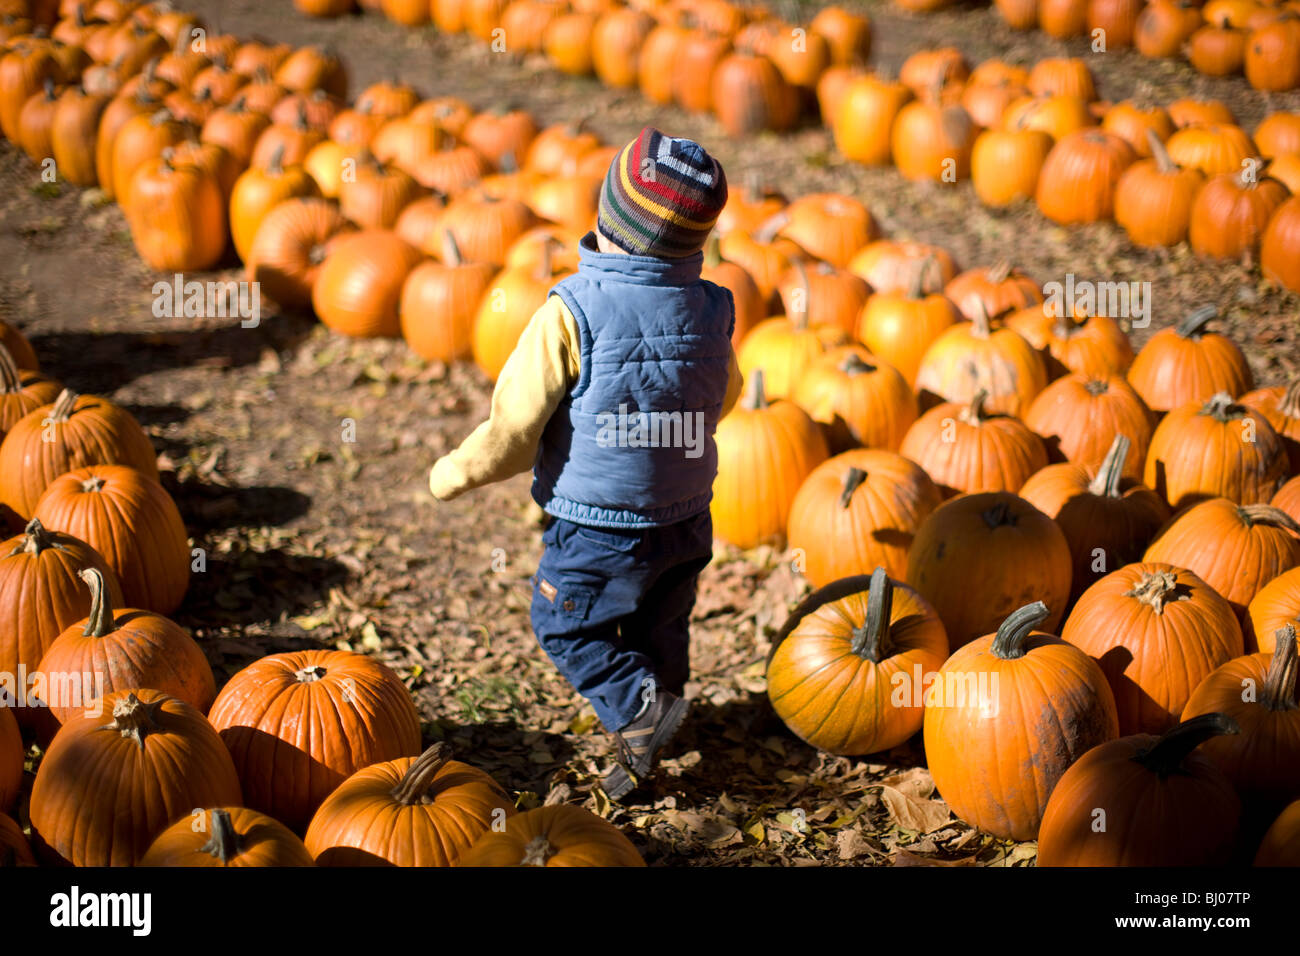 Young boy at a pumpkin patch. Stock Photo